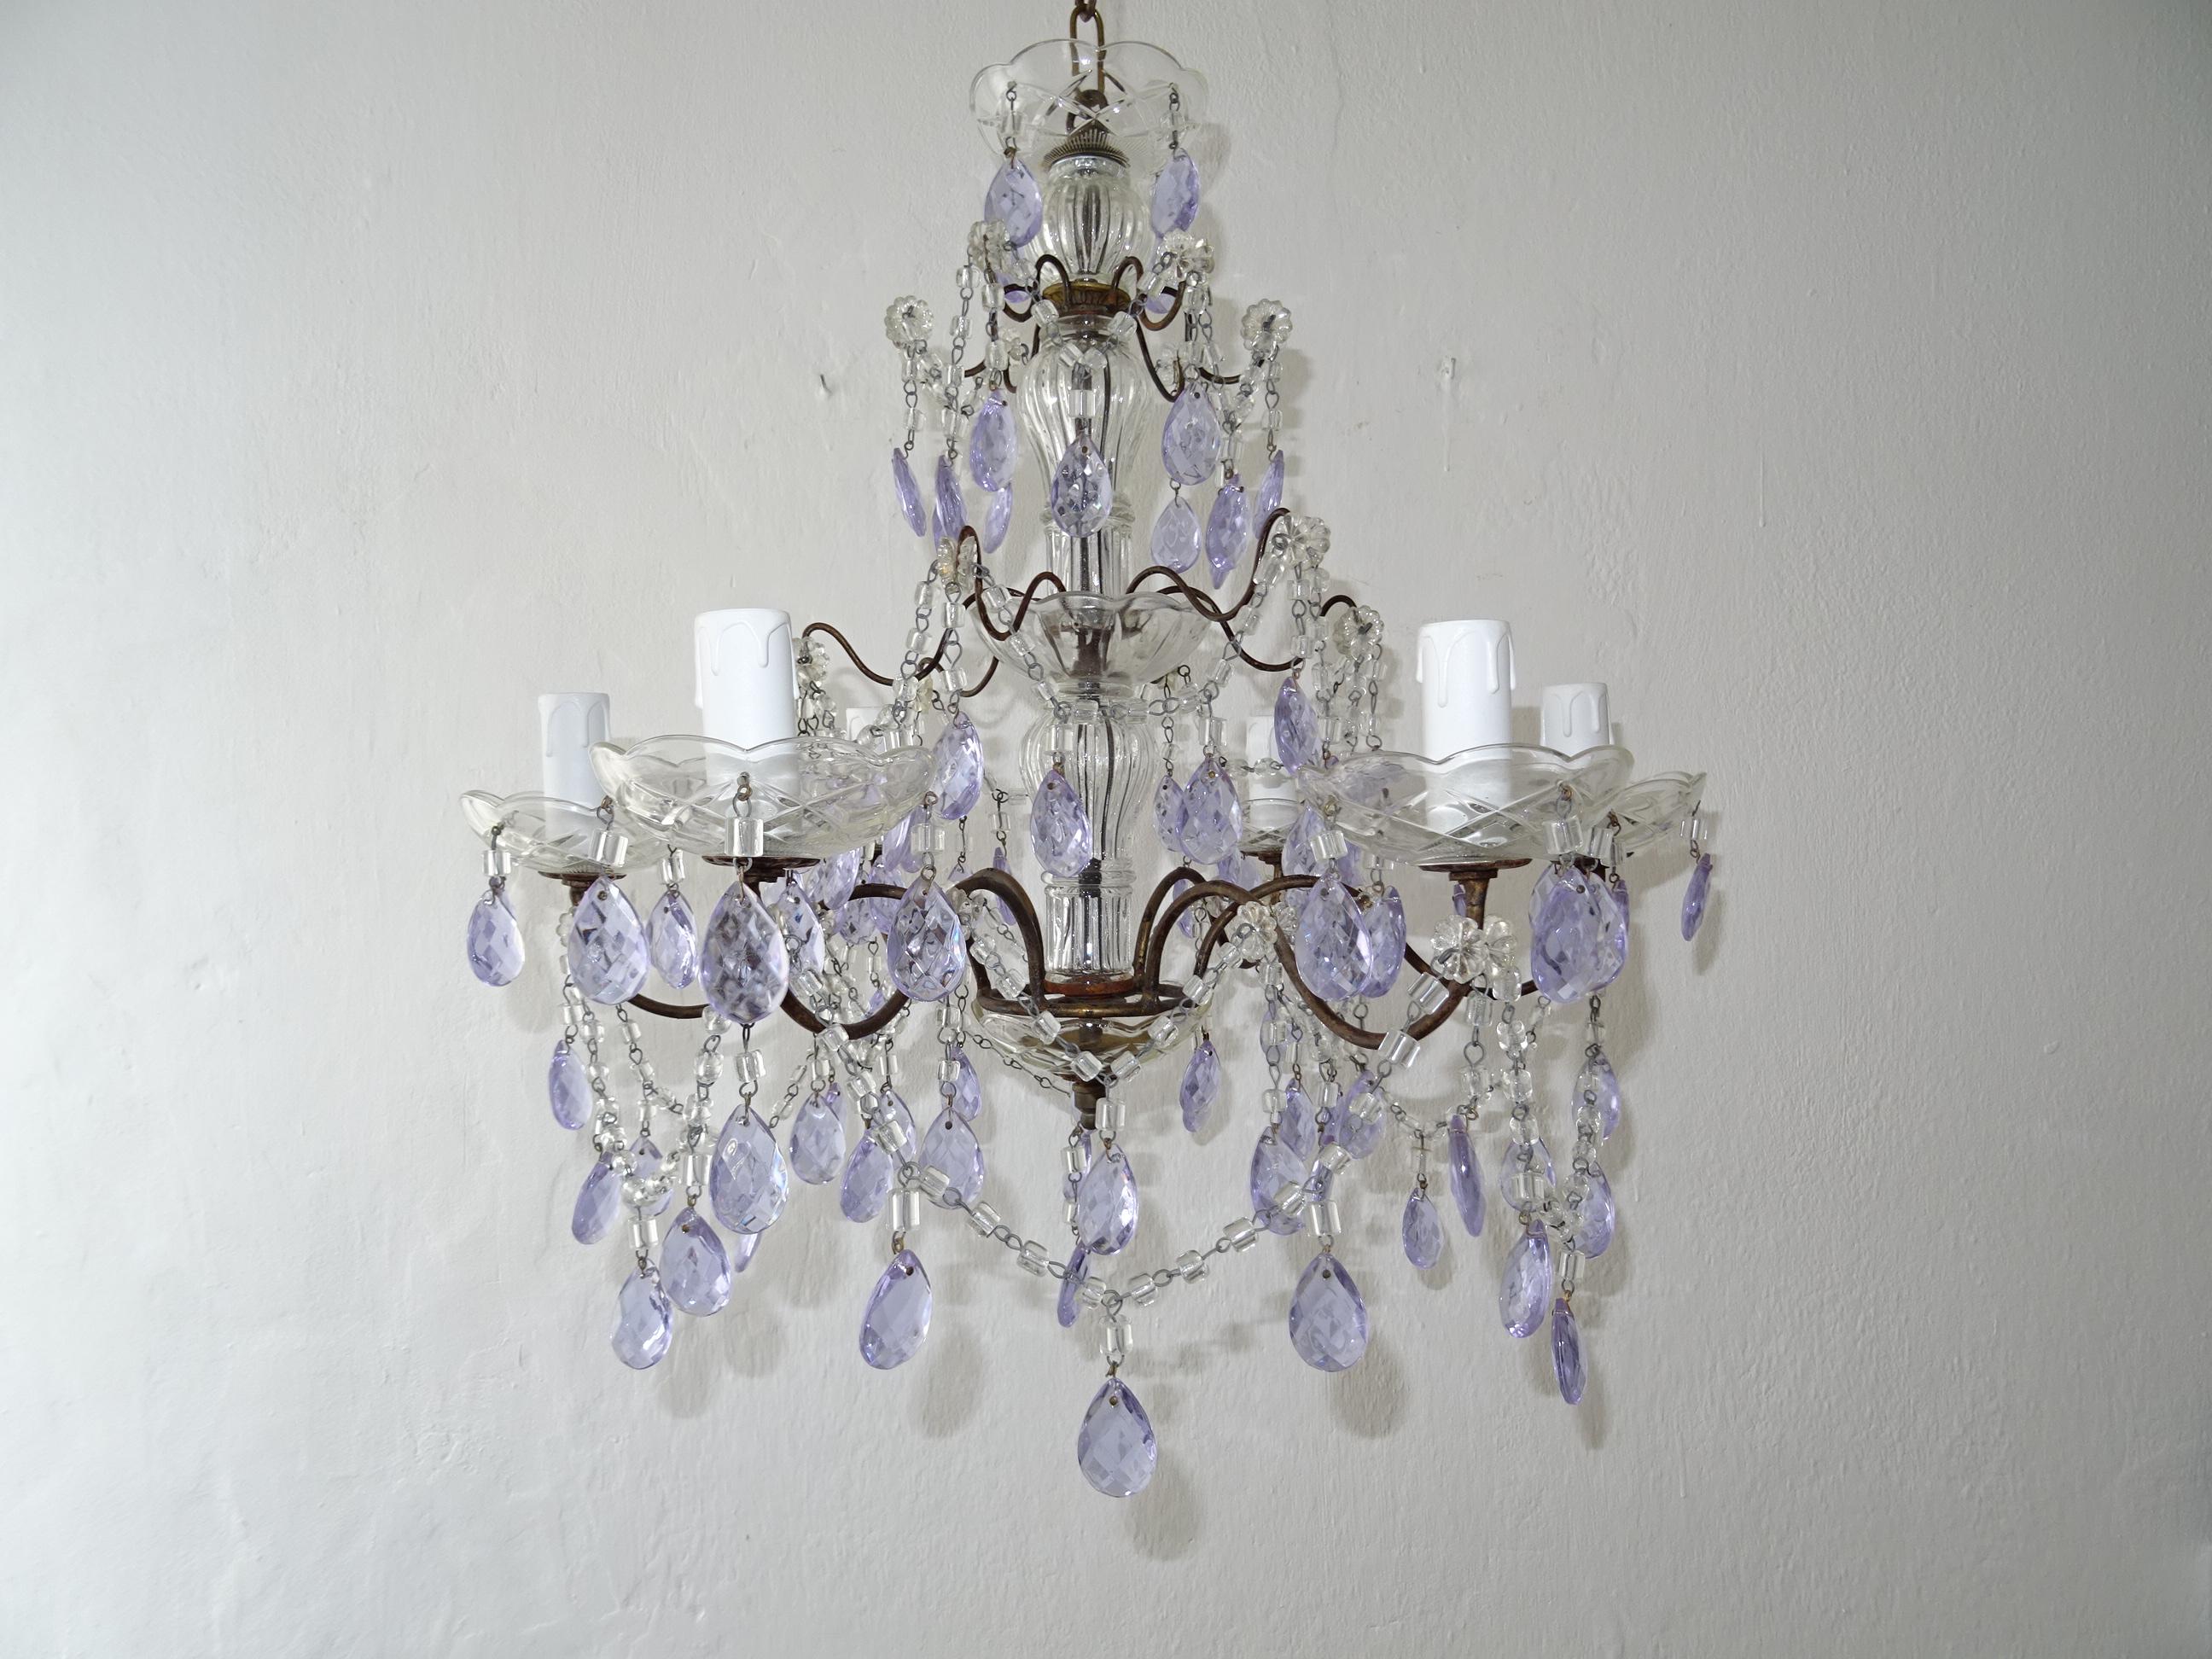 Housing six-lights, bobéches in lavender crystal prisms. Will be re-wired with certified UL US sockets for the USA and appropriate sockets for other countries and ready to hang. Free priority UPS shipping from Italy, no custom fees. Adoring 3 tiers